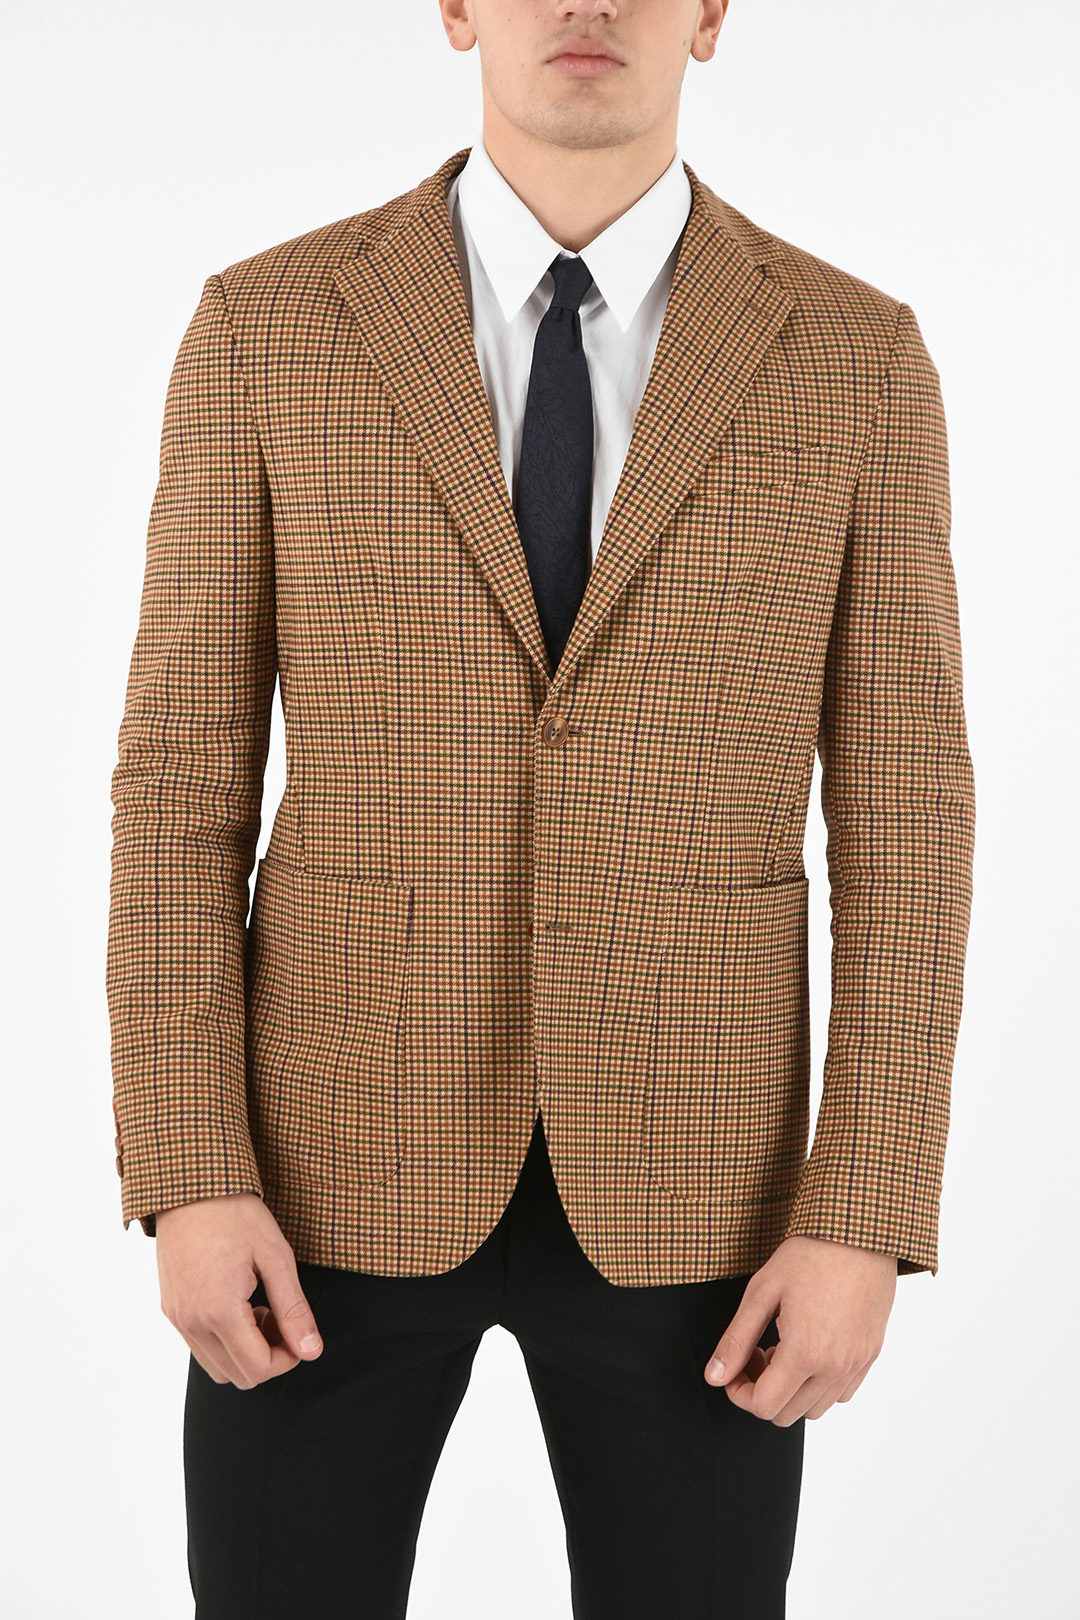 Traiano houndstooth side vents blazer men - Glamood Outlet